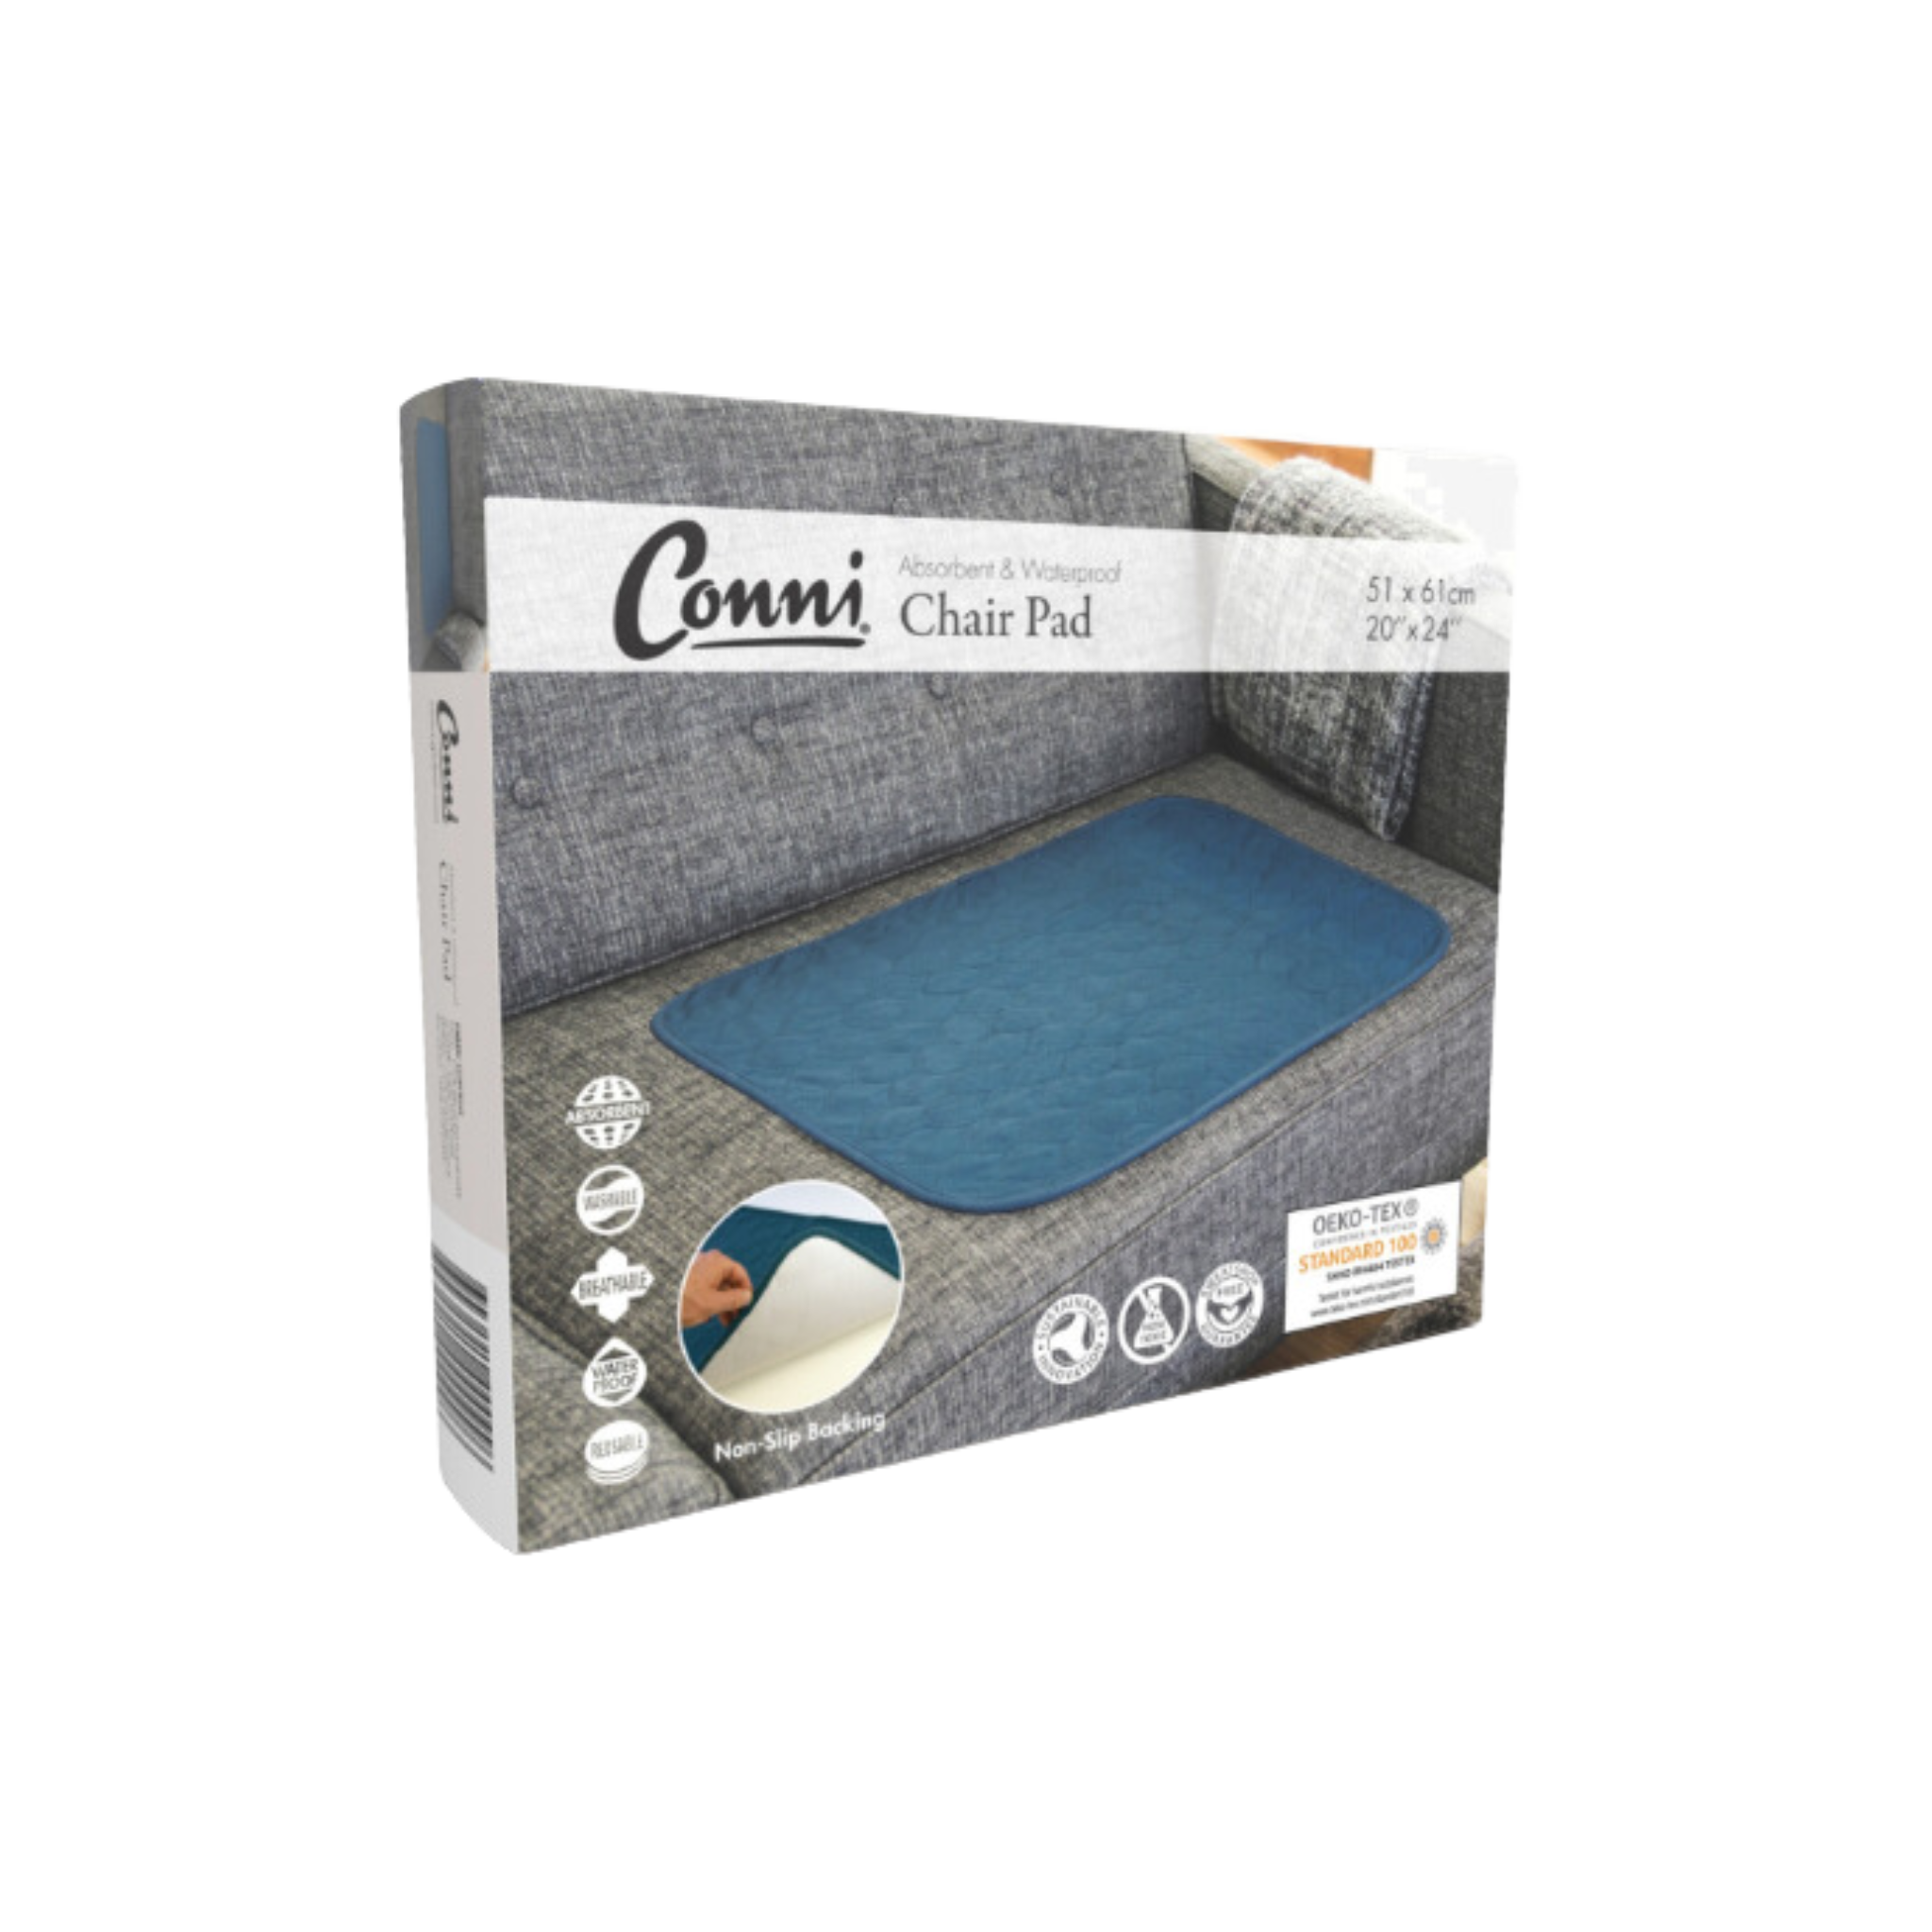 Conni Chairpad Large - Teal Blue